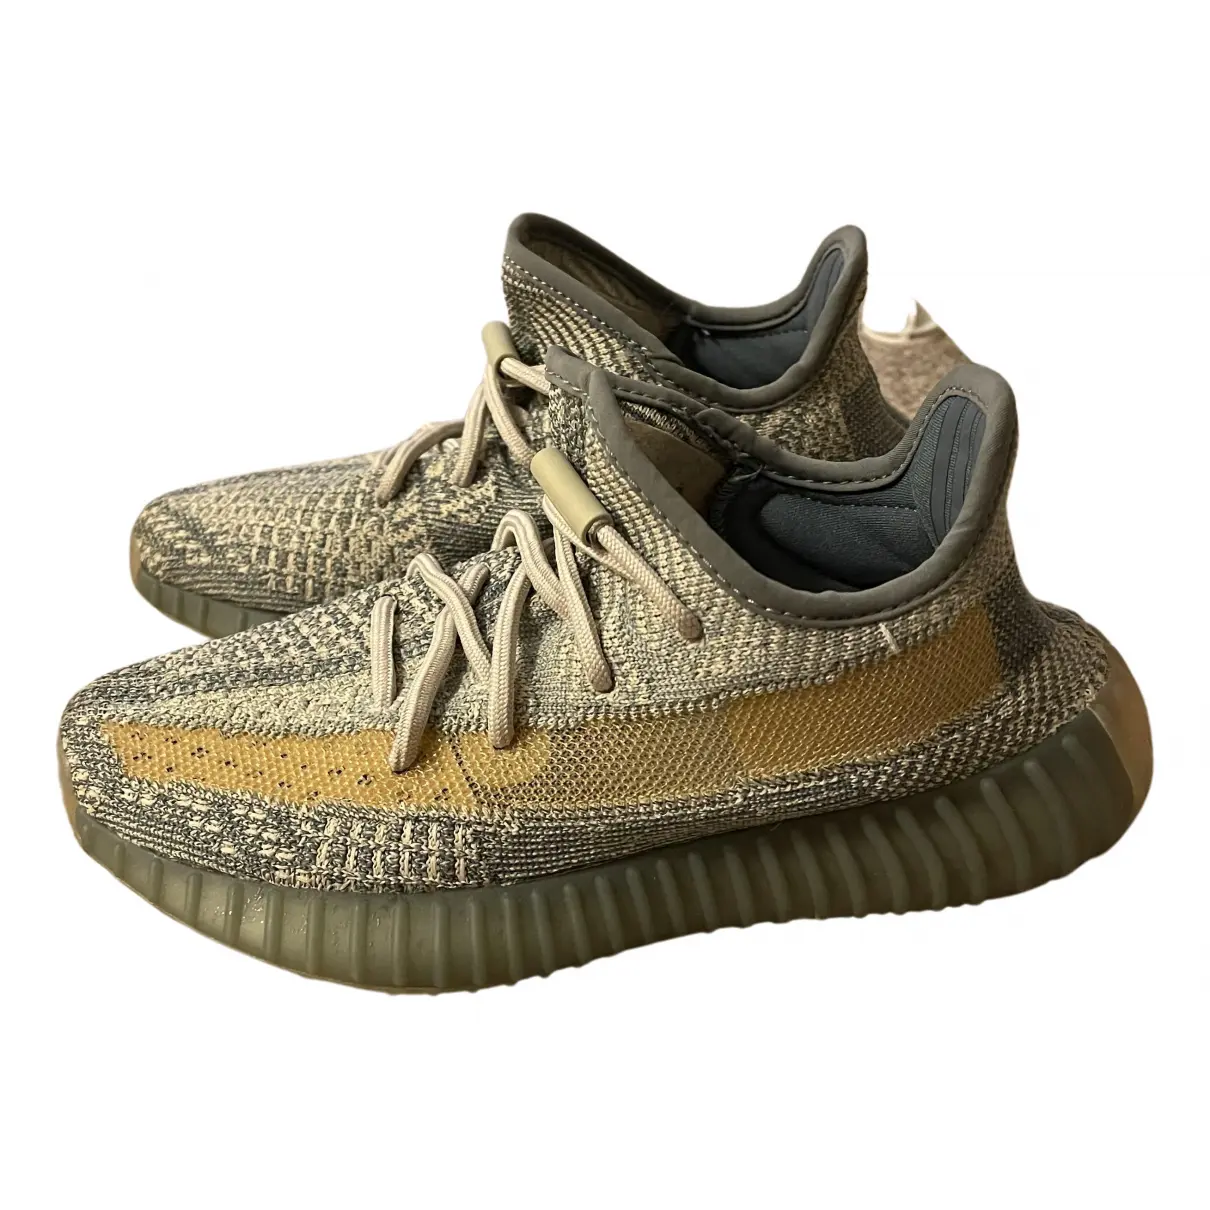 Boost 350 V2 trainers Yeezy x Adidas